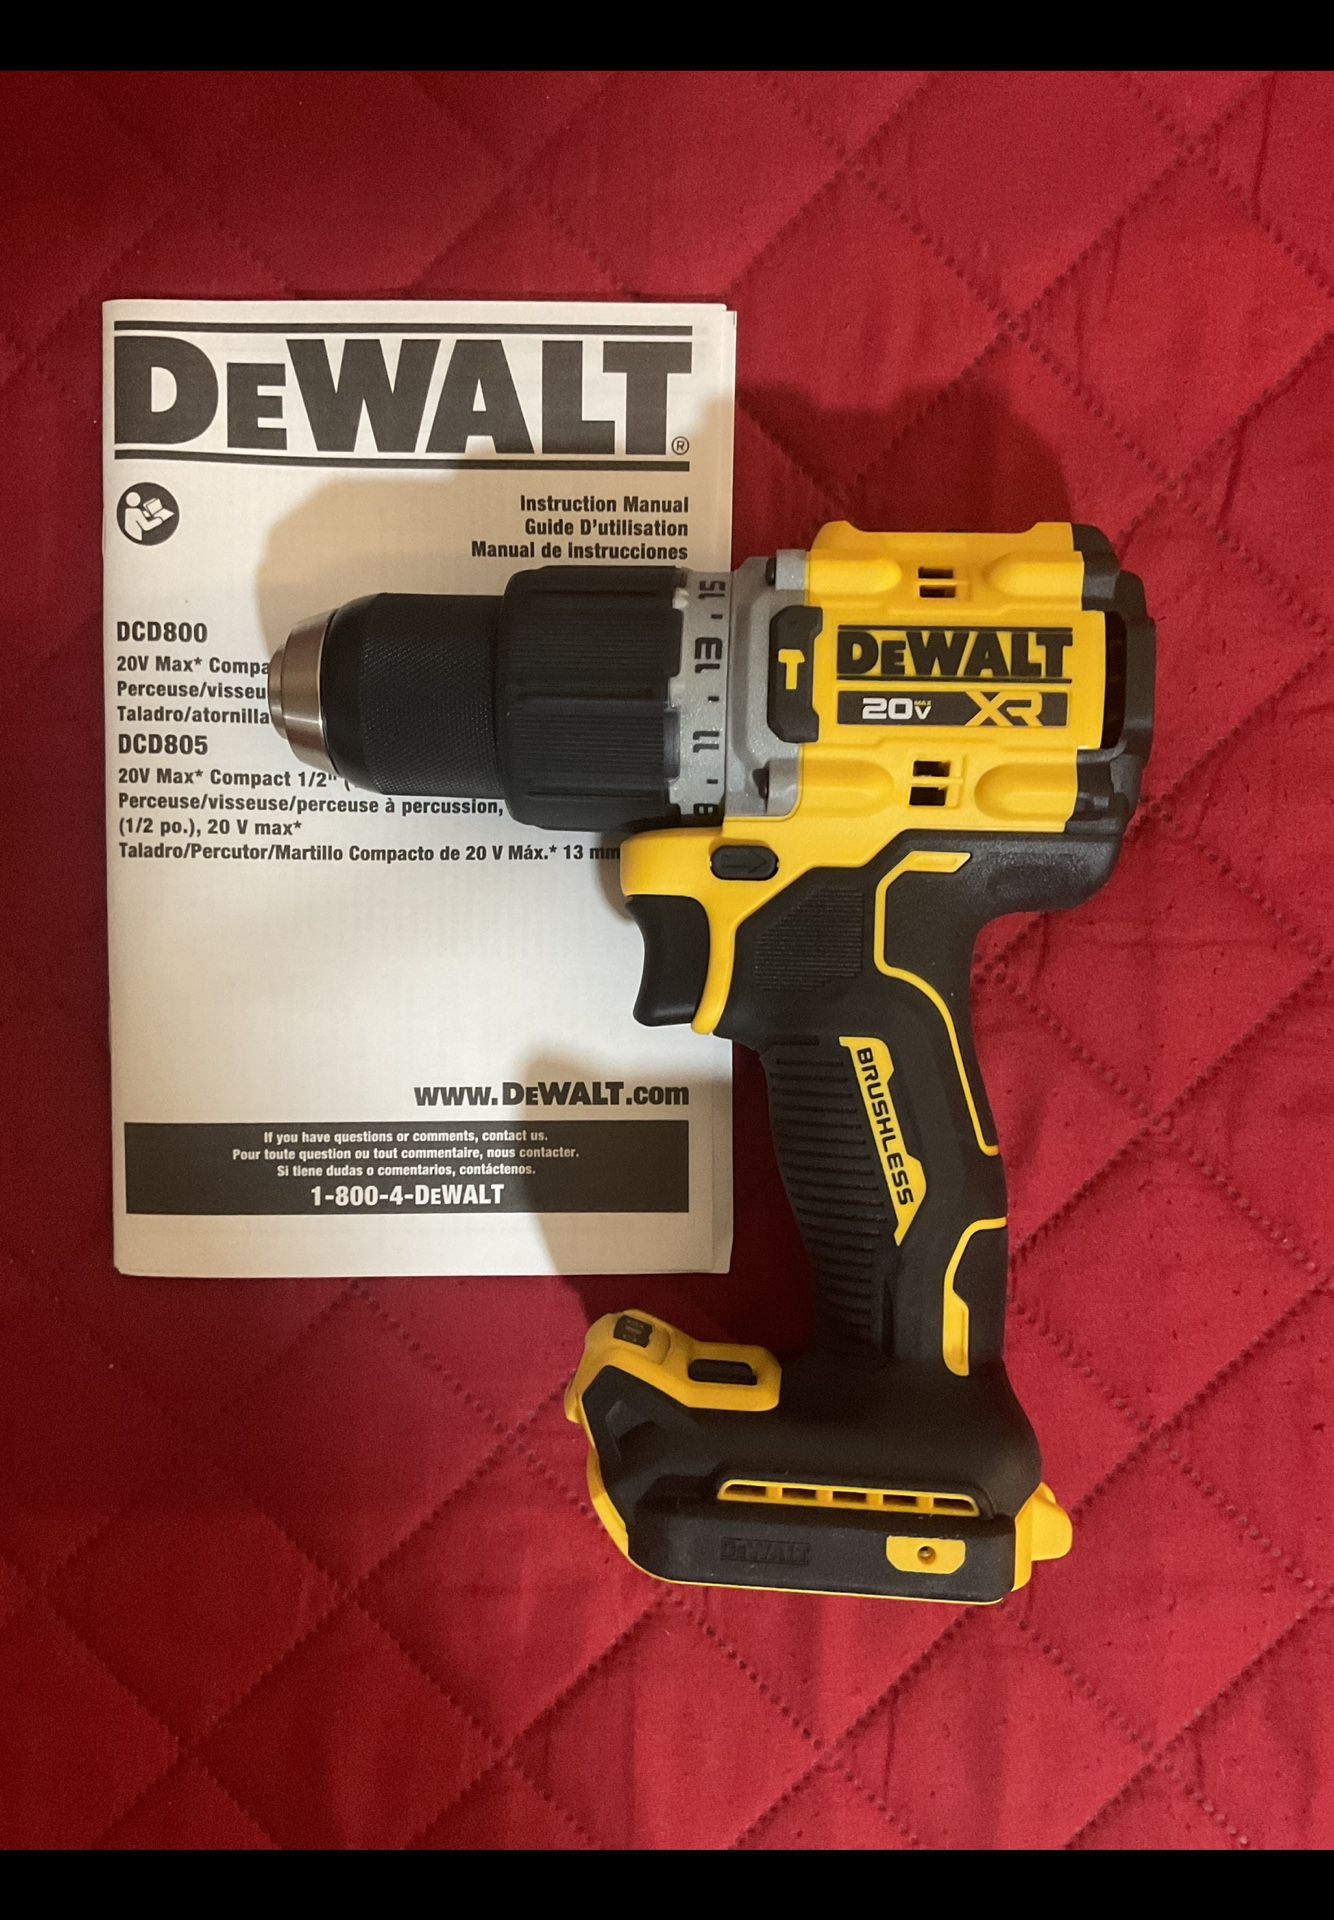 DeWalt. 20V MAX XR Lithium Ion Compact Cordless Brushless 1/2” Hammer Drill (Tool Only). DCD805B.